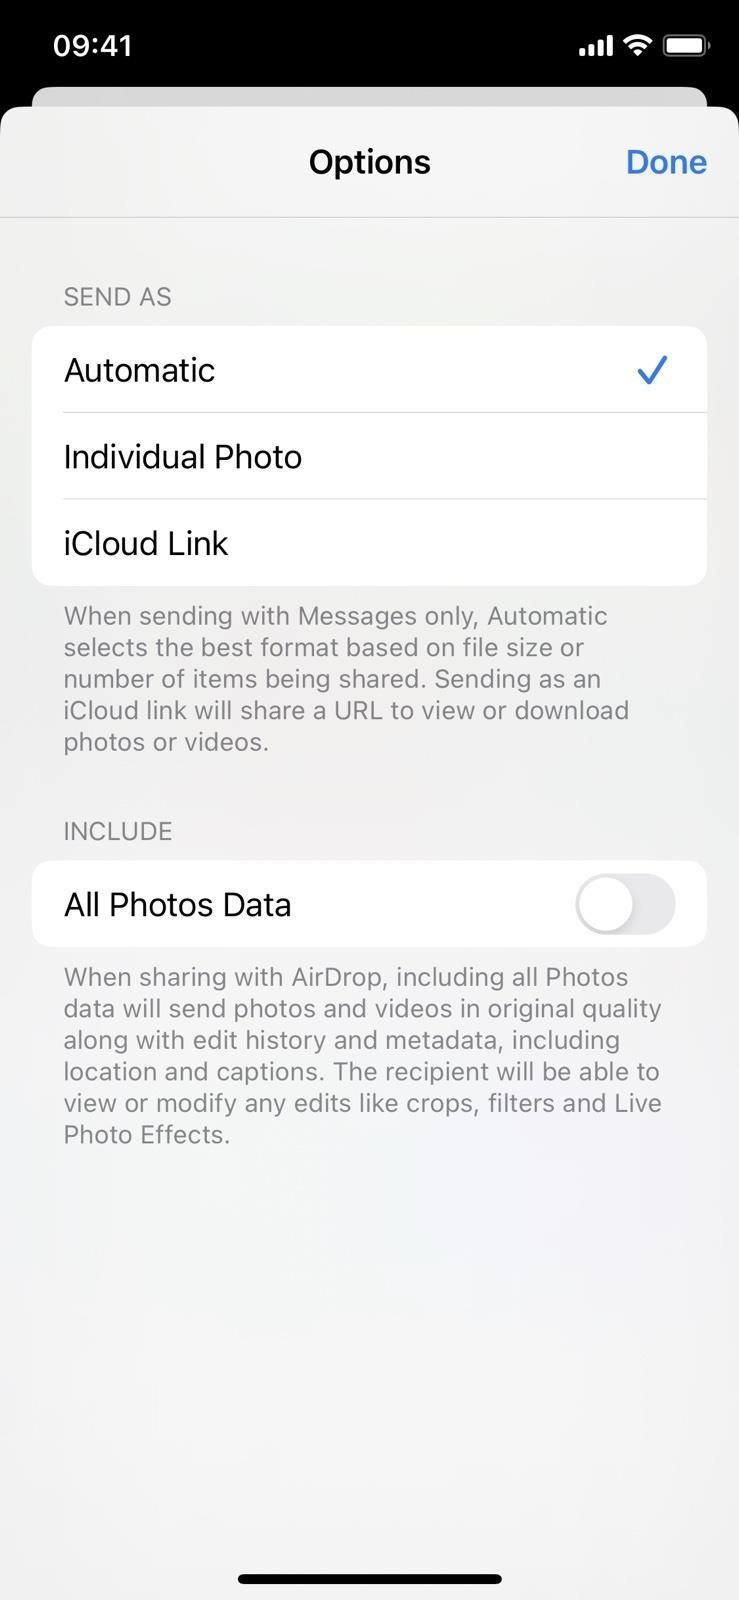 20 Things You Can Do in Your Photos App in iOS 16 That You Couldn't Do Before